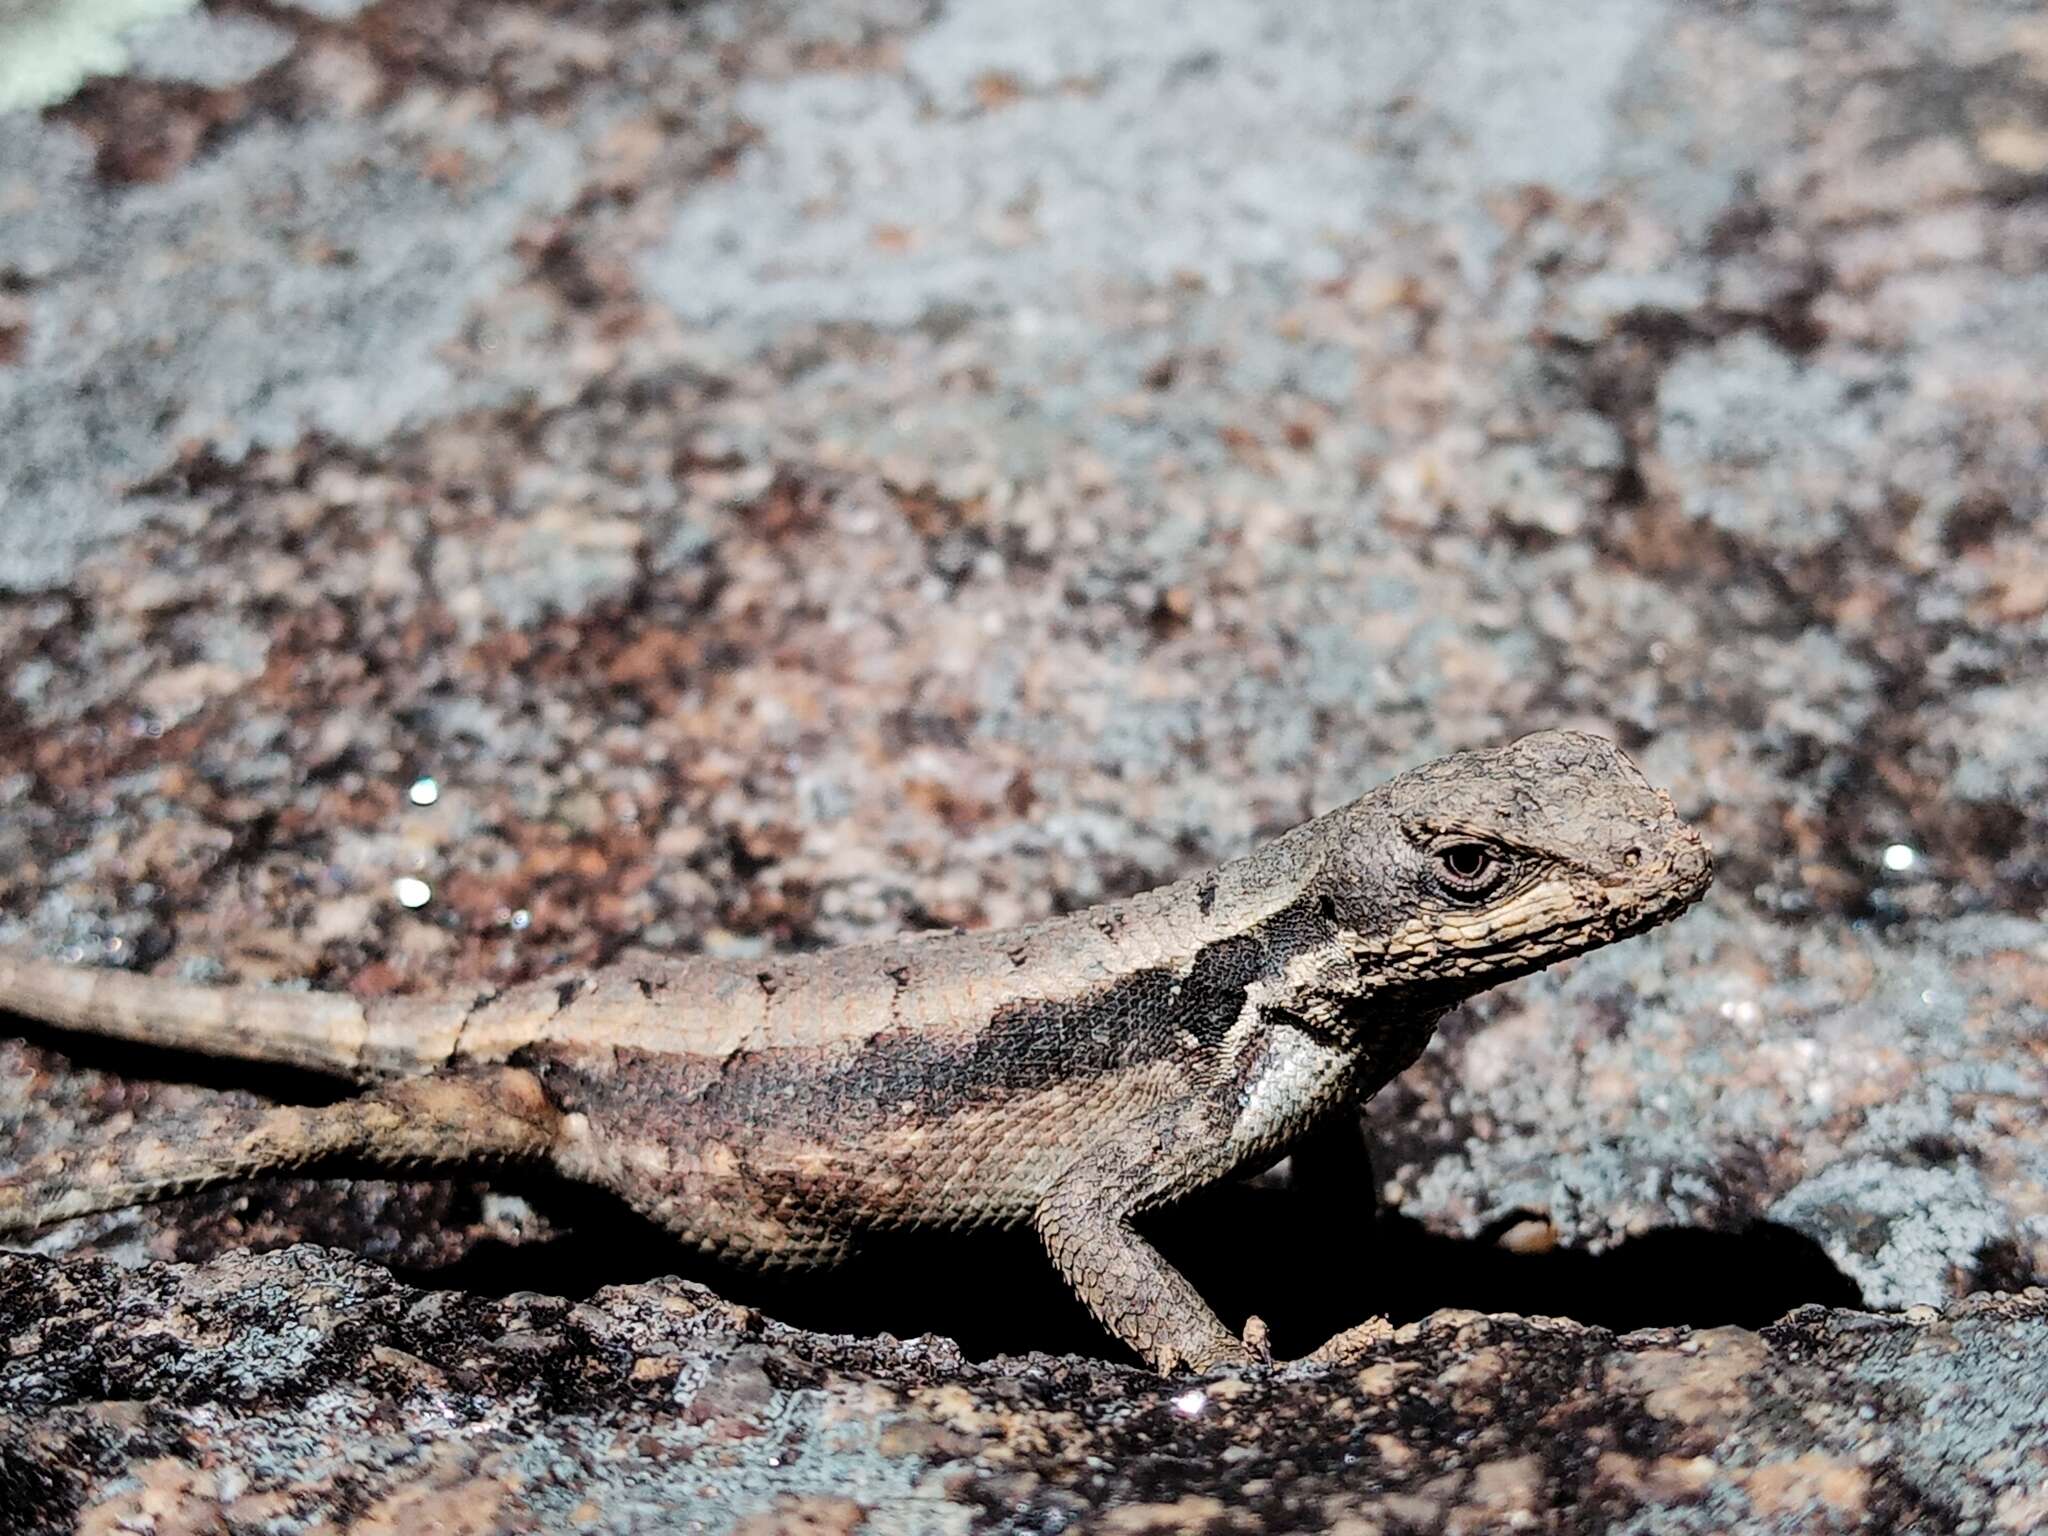 Image of Upland Long-tailed Spiny Lizard